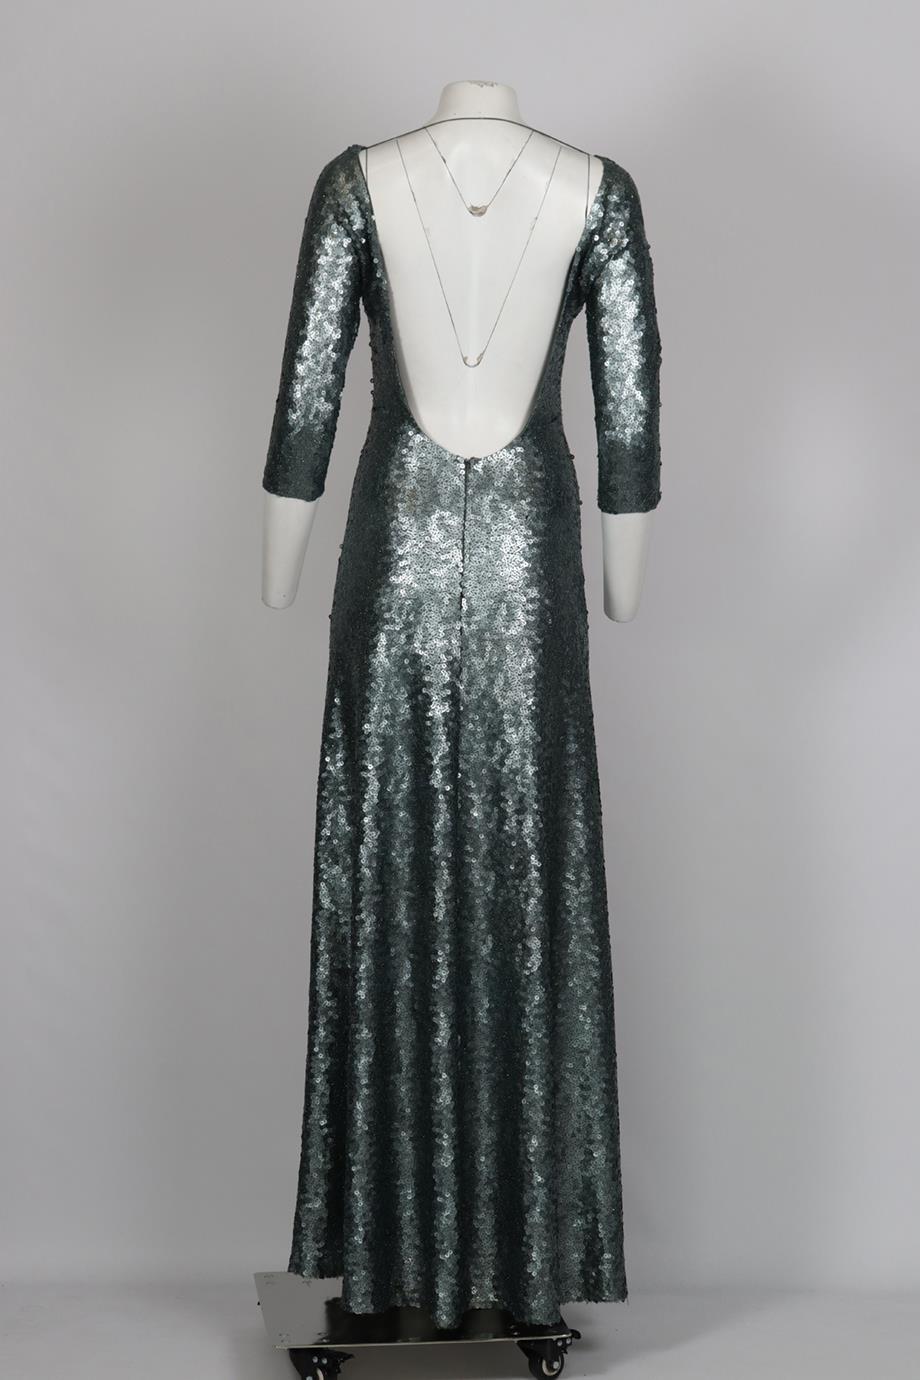 MARC JACOBS SEQUINNED SATIN MAXI DRESS US 2 UK 6